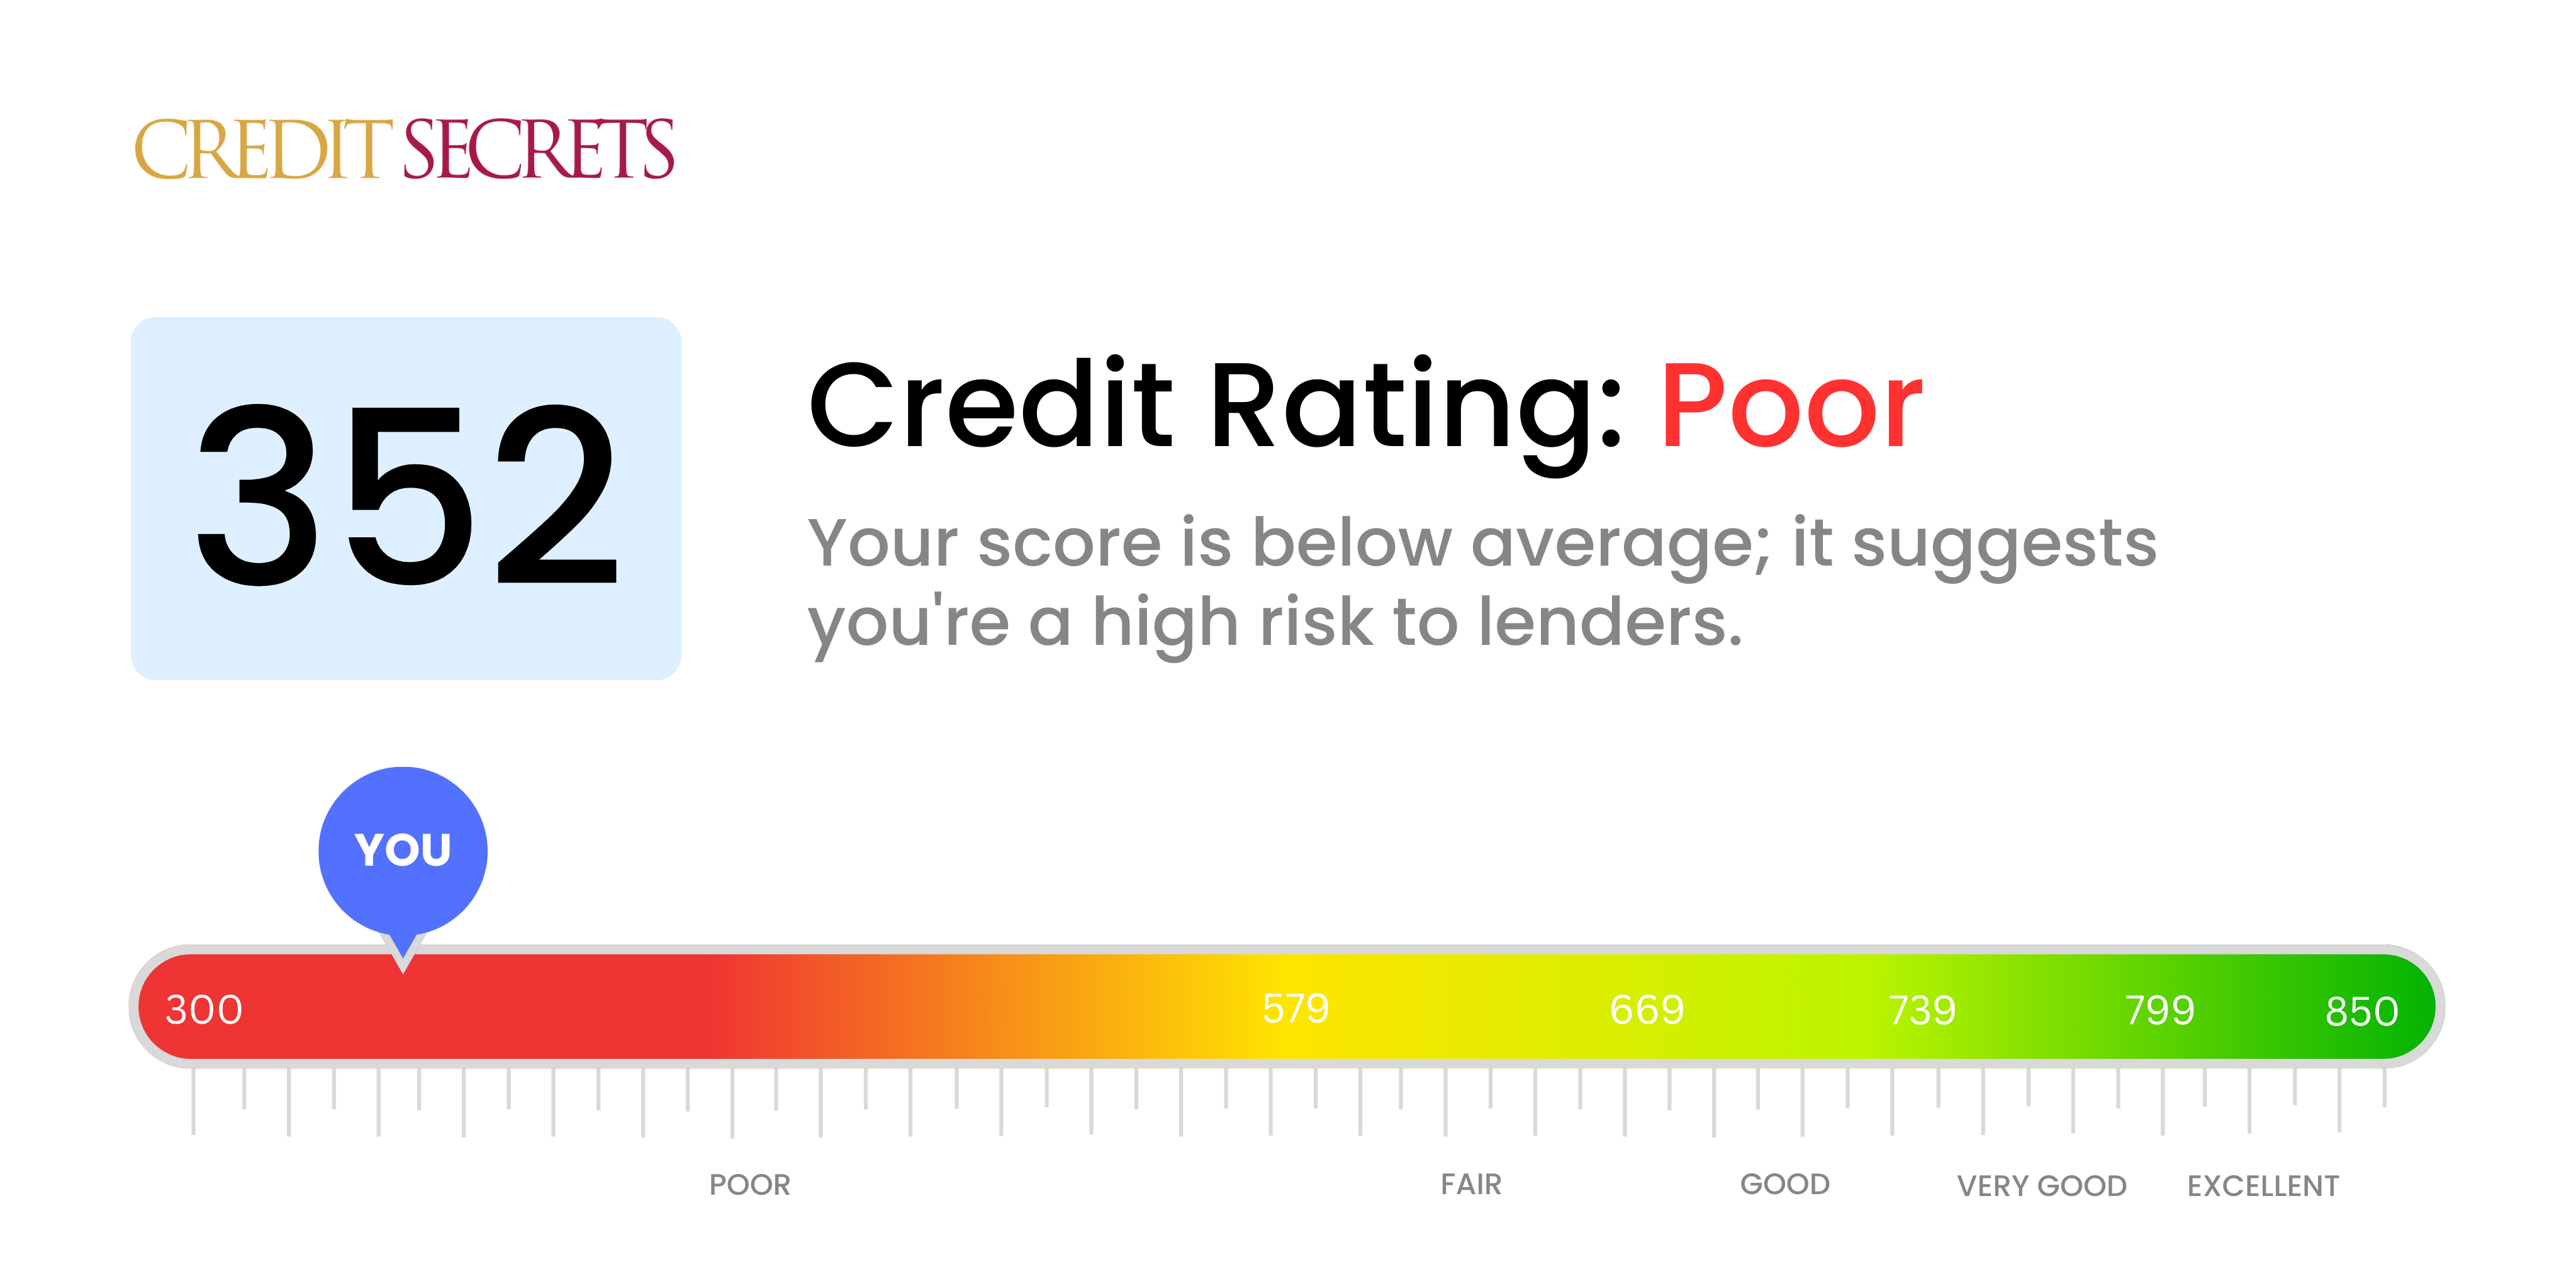 Is 352 a good credit score?